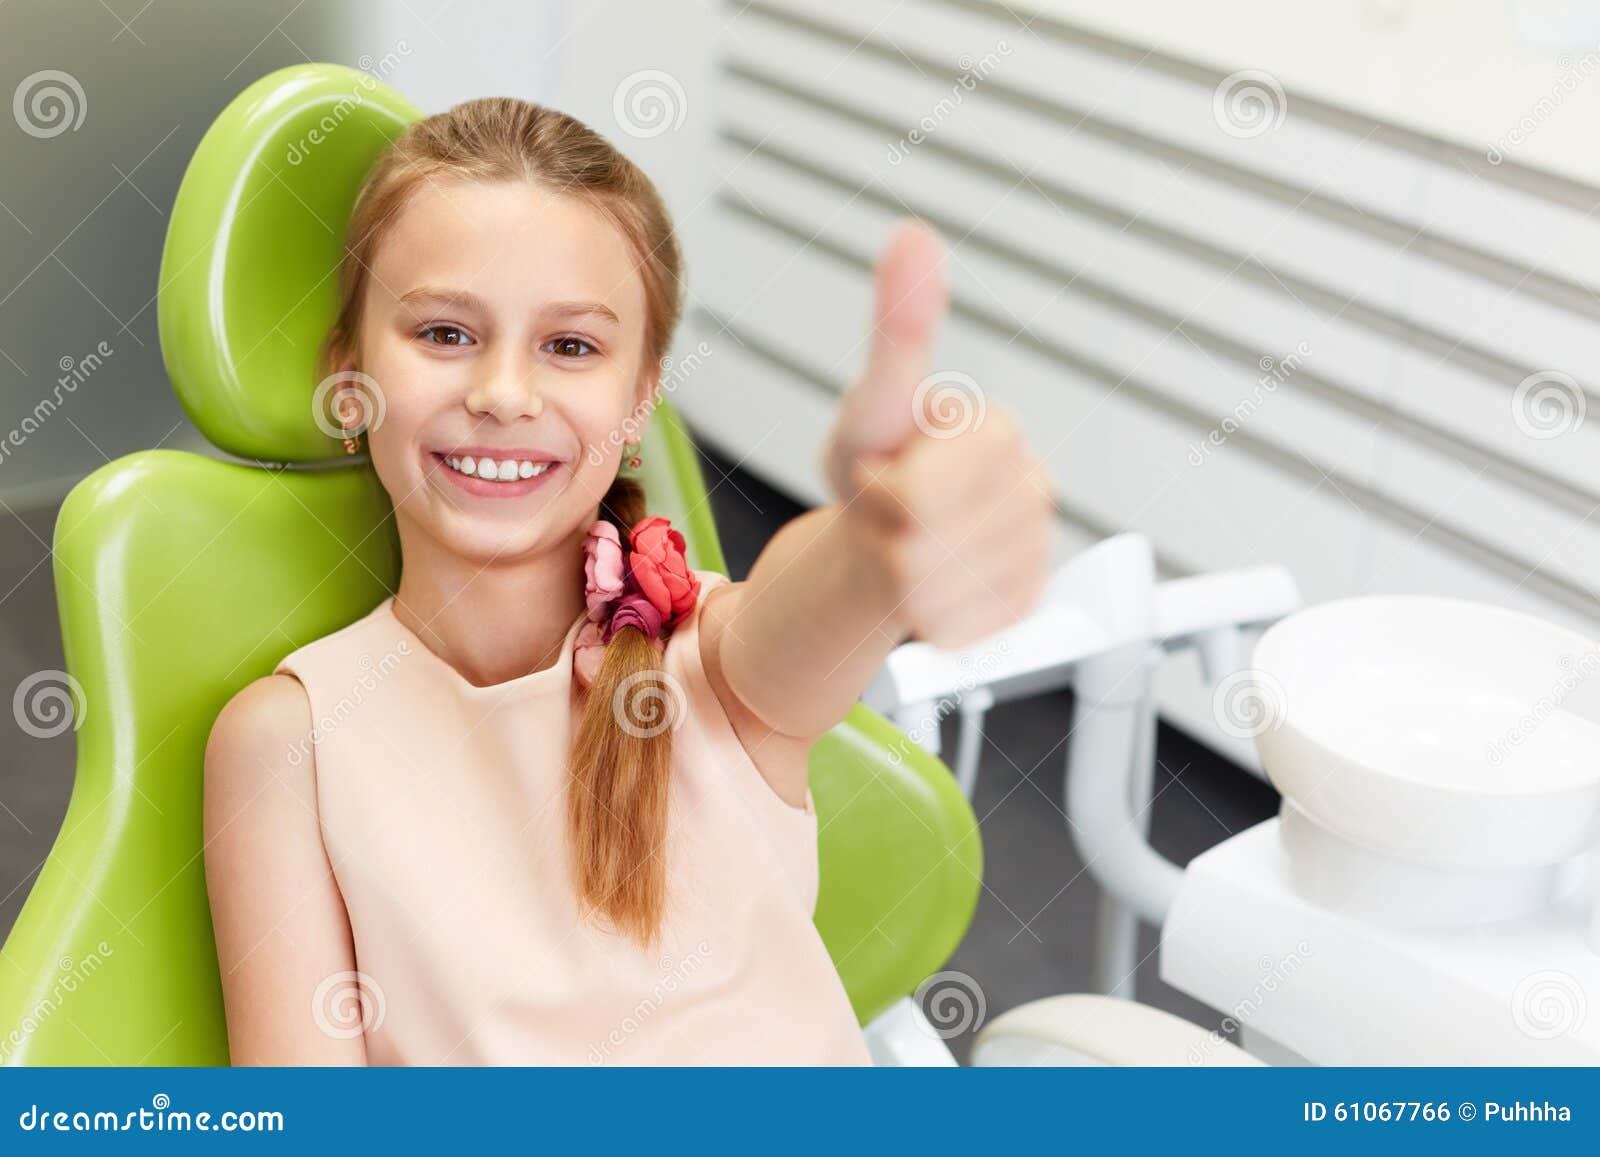 portrait of happy girl shows thumb up gesture at dental clinic